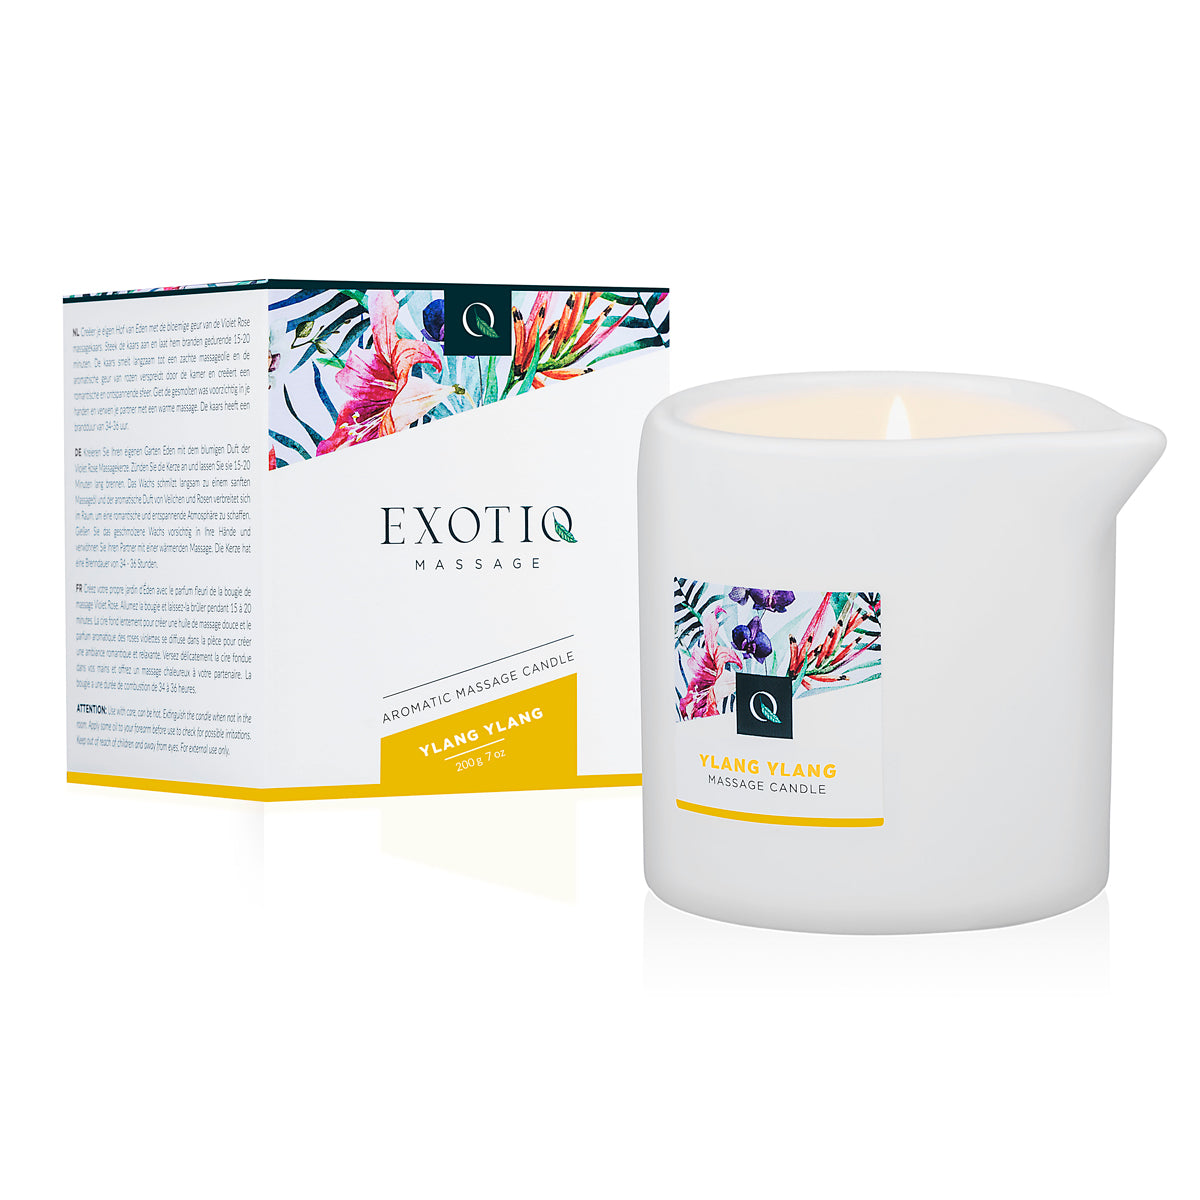 Exotiq Massage Candle Ylang Ylang 200g - Just for you desires